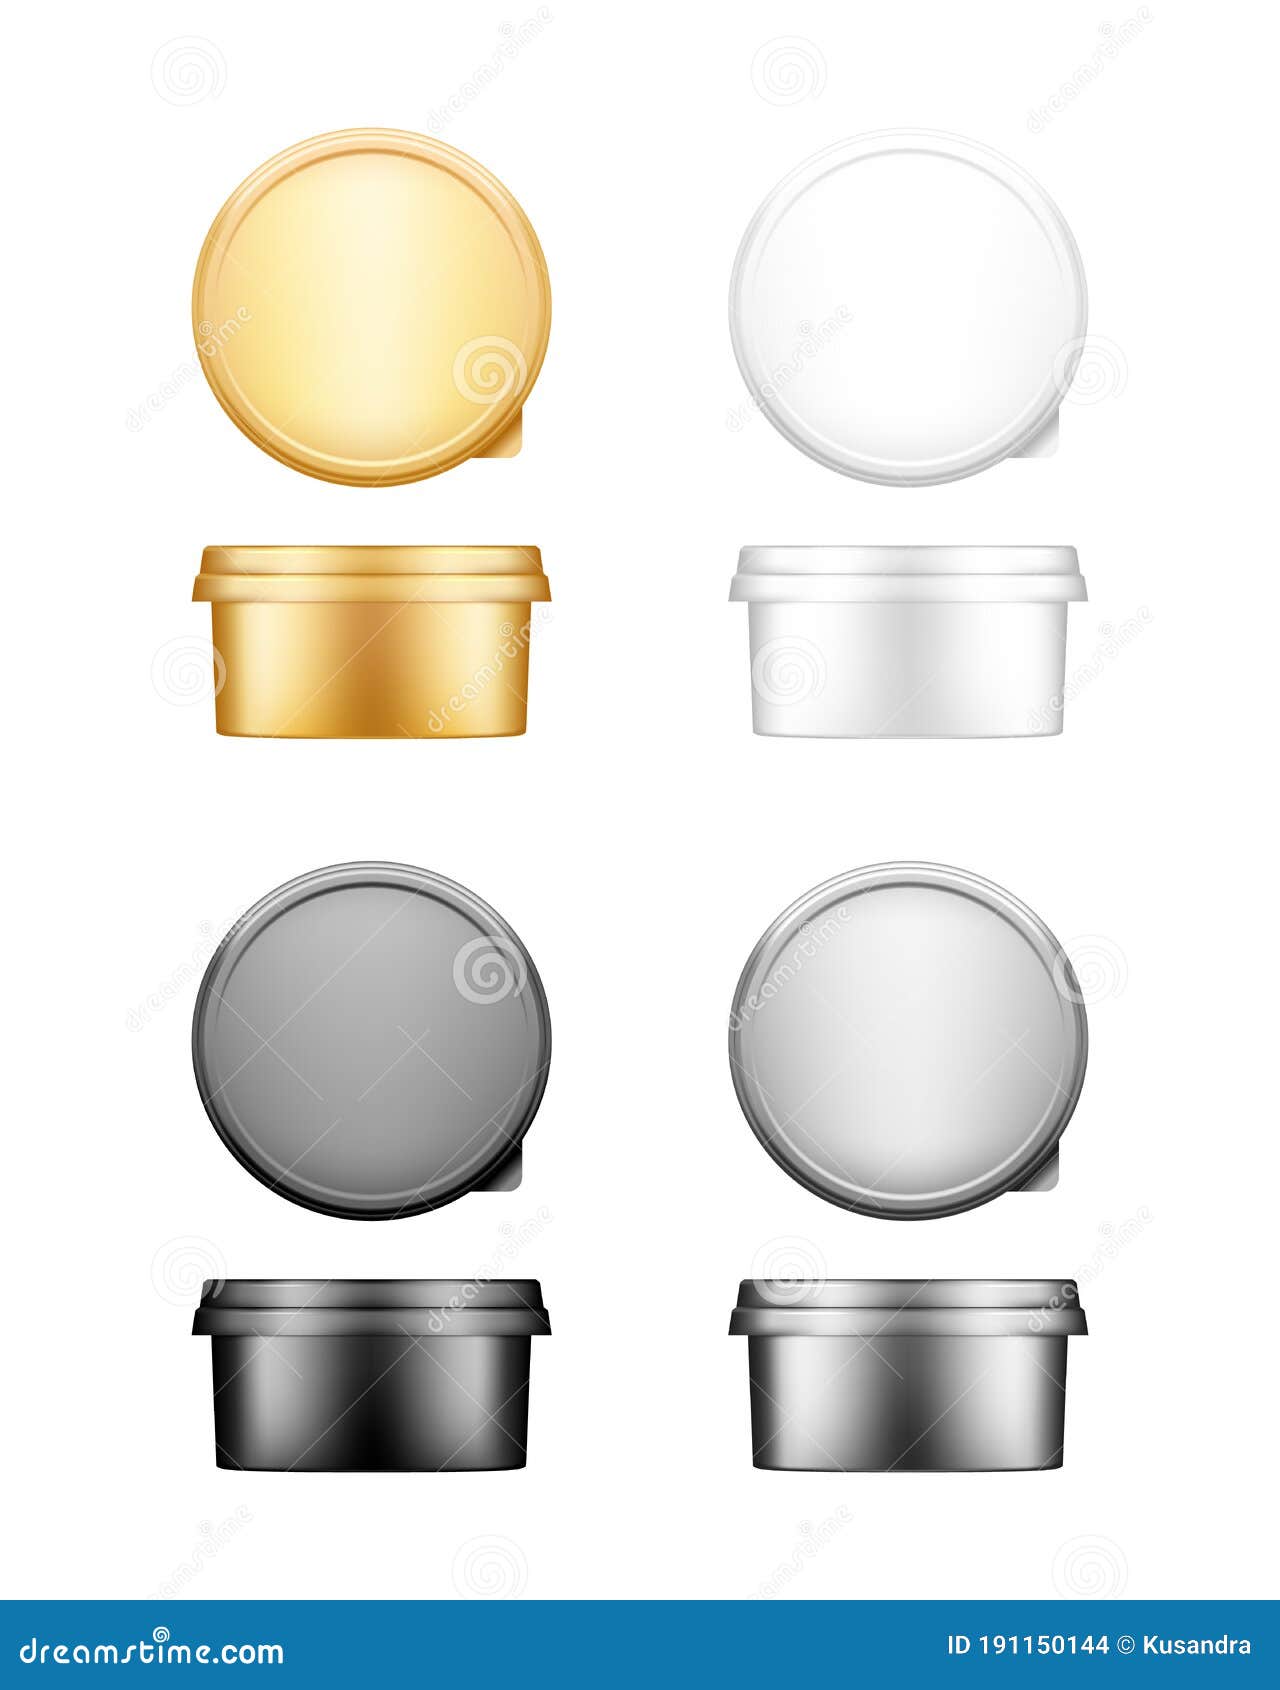 Download Cheese, Butter Or Margarine Round Container With Lid Mockup - Front And Top View Stock Vector ...